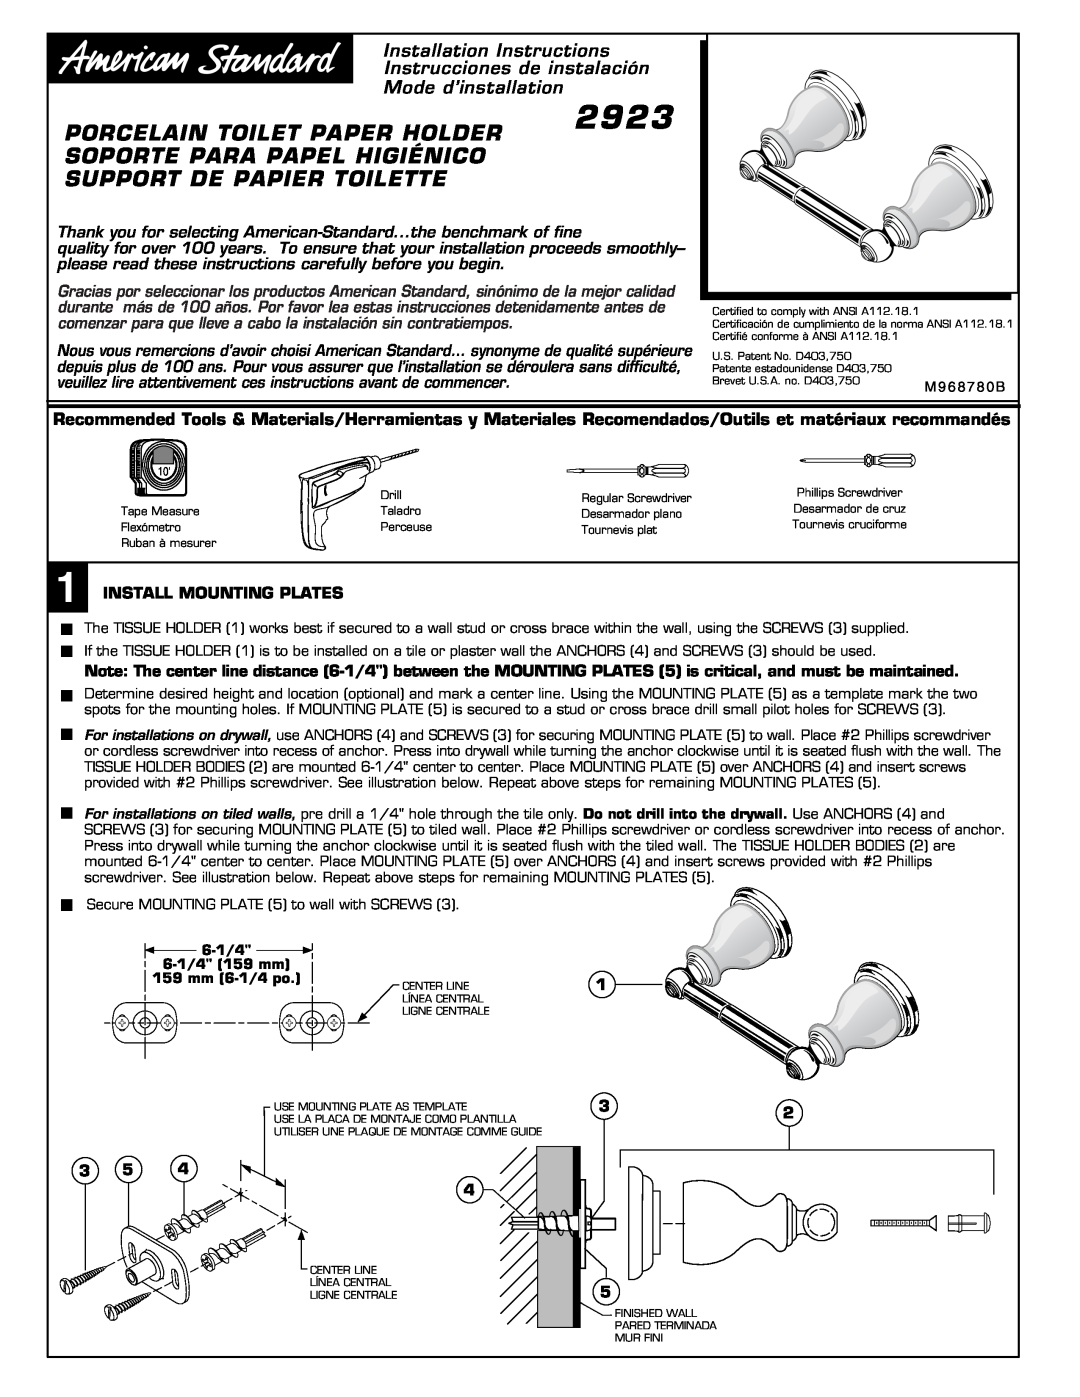 American Standard 2923 installation instructions Install Mounting Plates, 6-1/4 6-1/4159 mm 159 mm 6-1/4po 